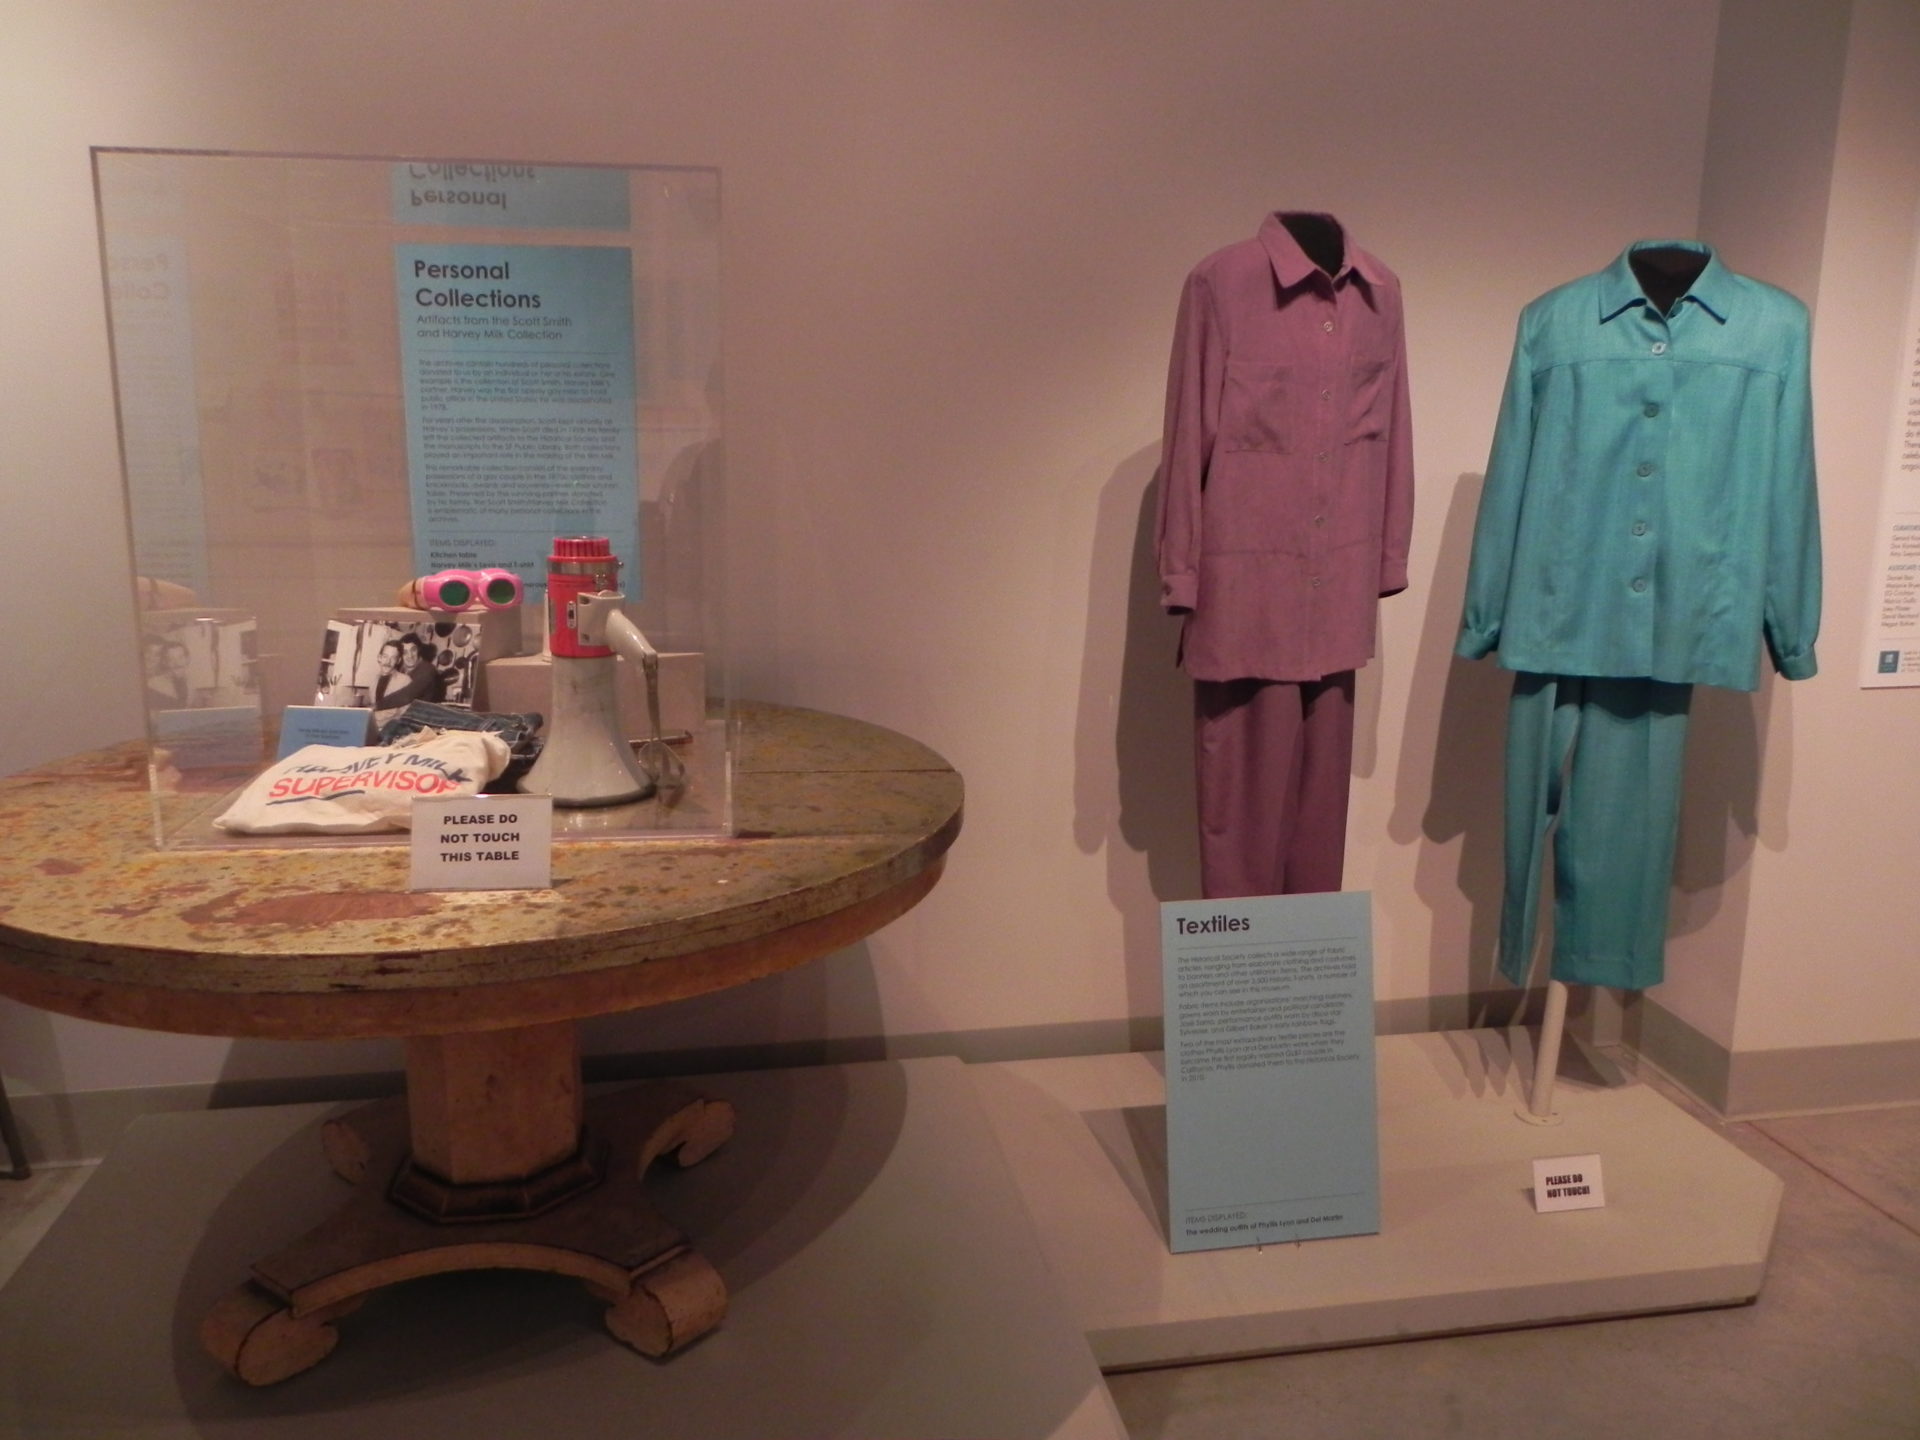 【Museums Link Asia-Pacific】GLBT History Museum: Balancing between Visibility and Diversity